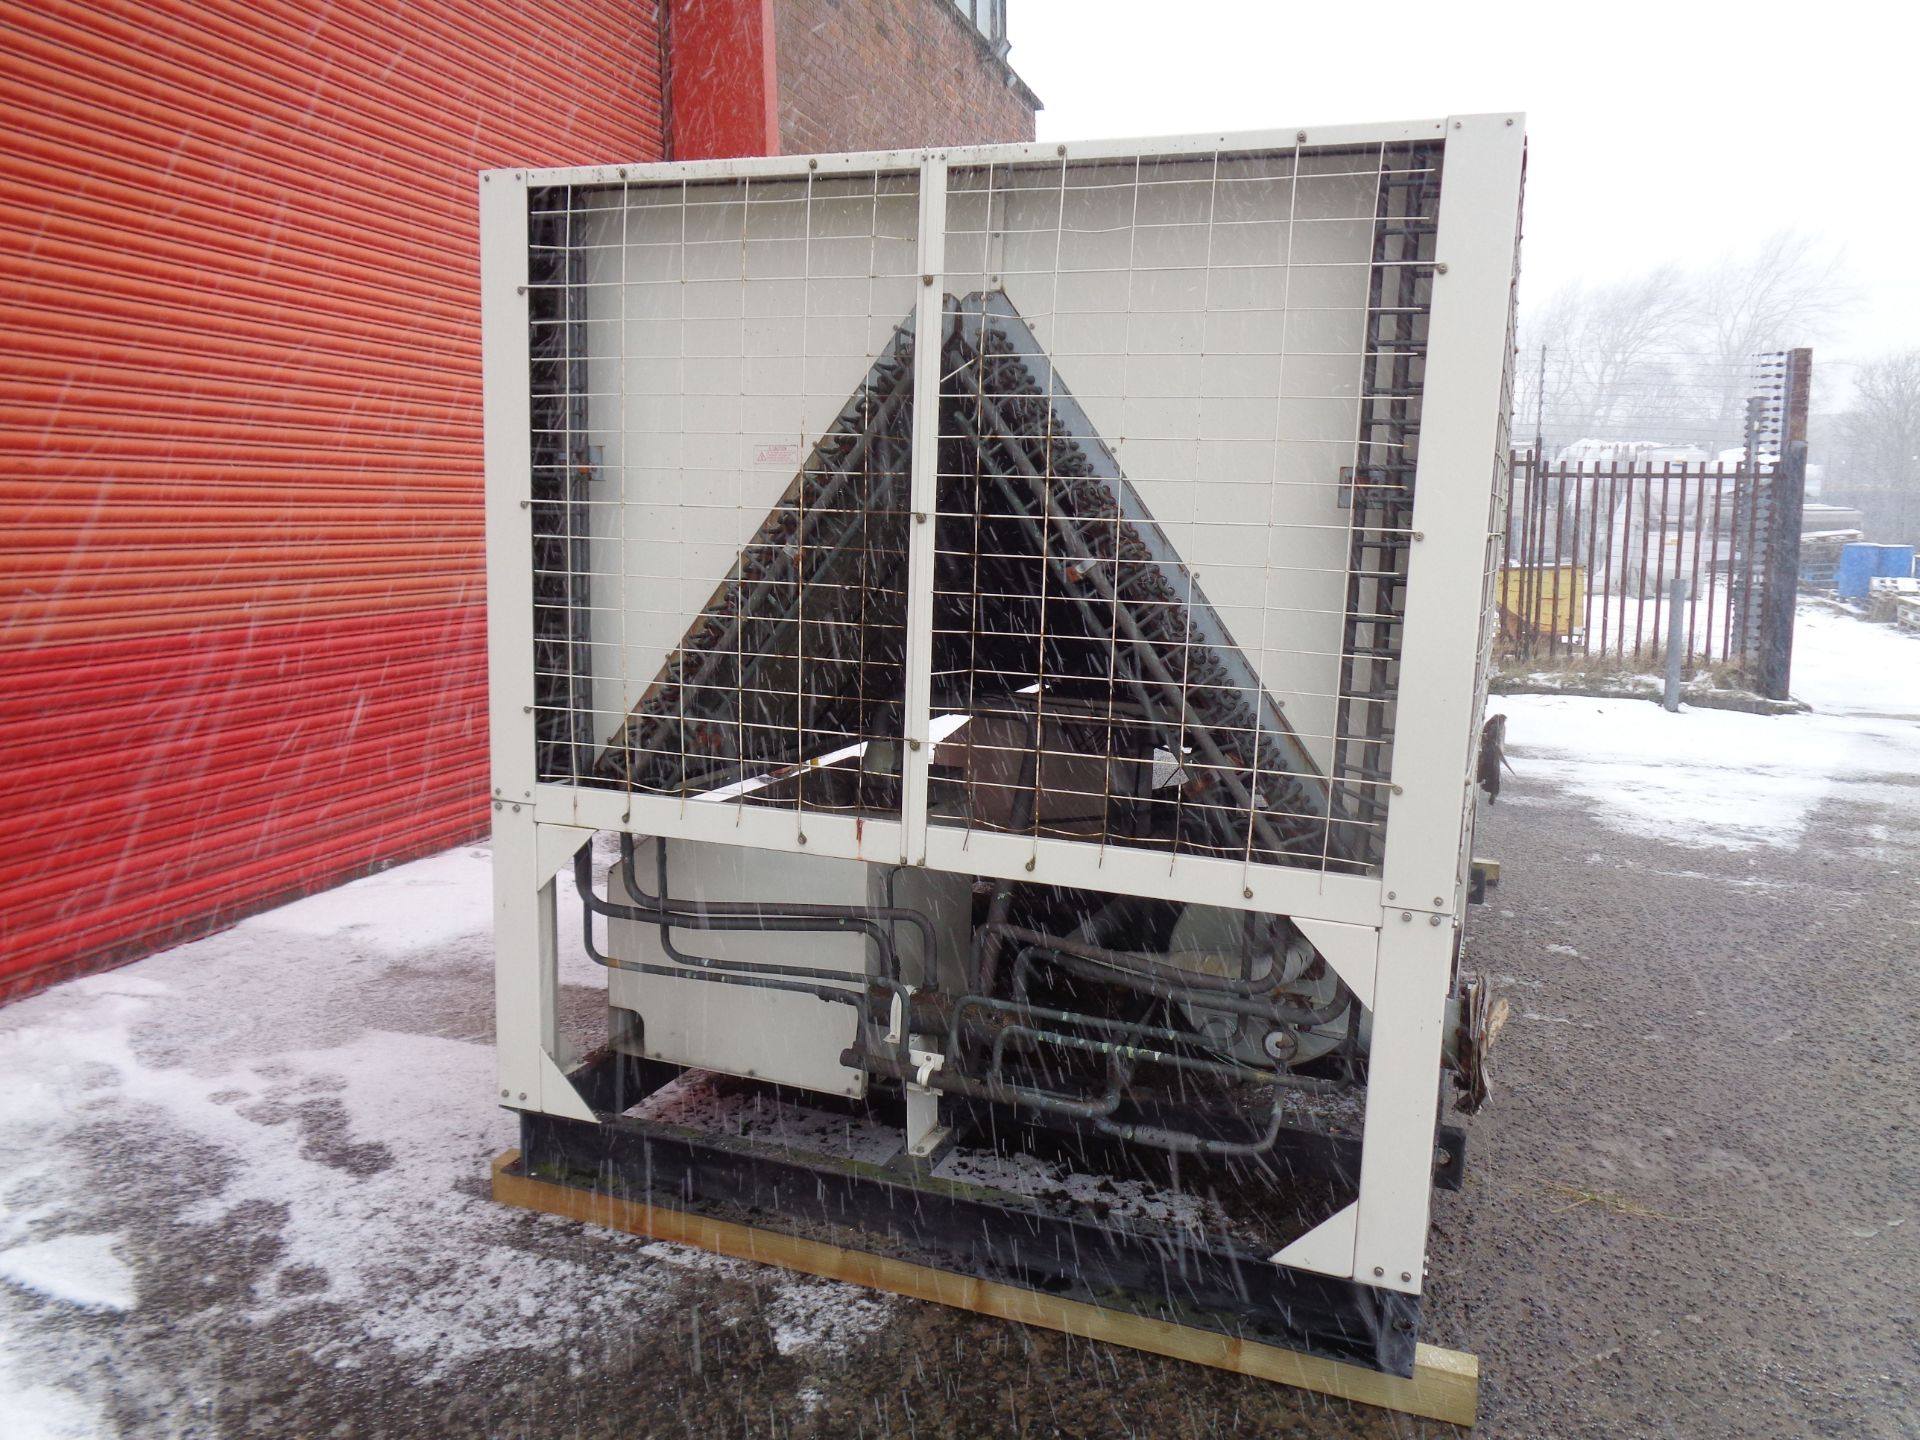 Hitachi ""H Series"" air cooled chiller model RCUG 150AHYZ1. 103 tons. New 2011. Chiller utilizes - Image 5 of 9